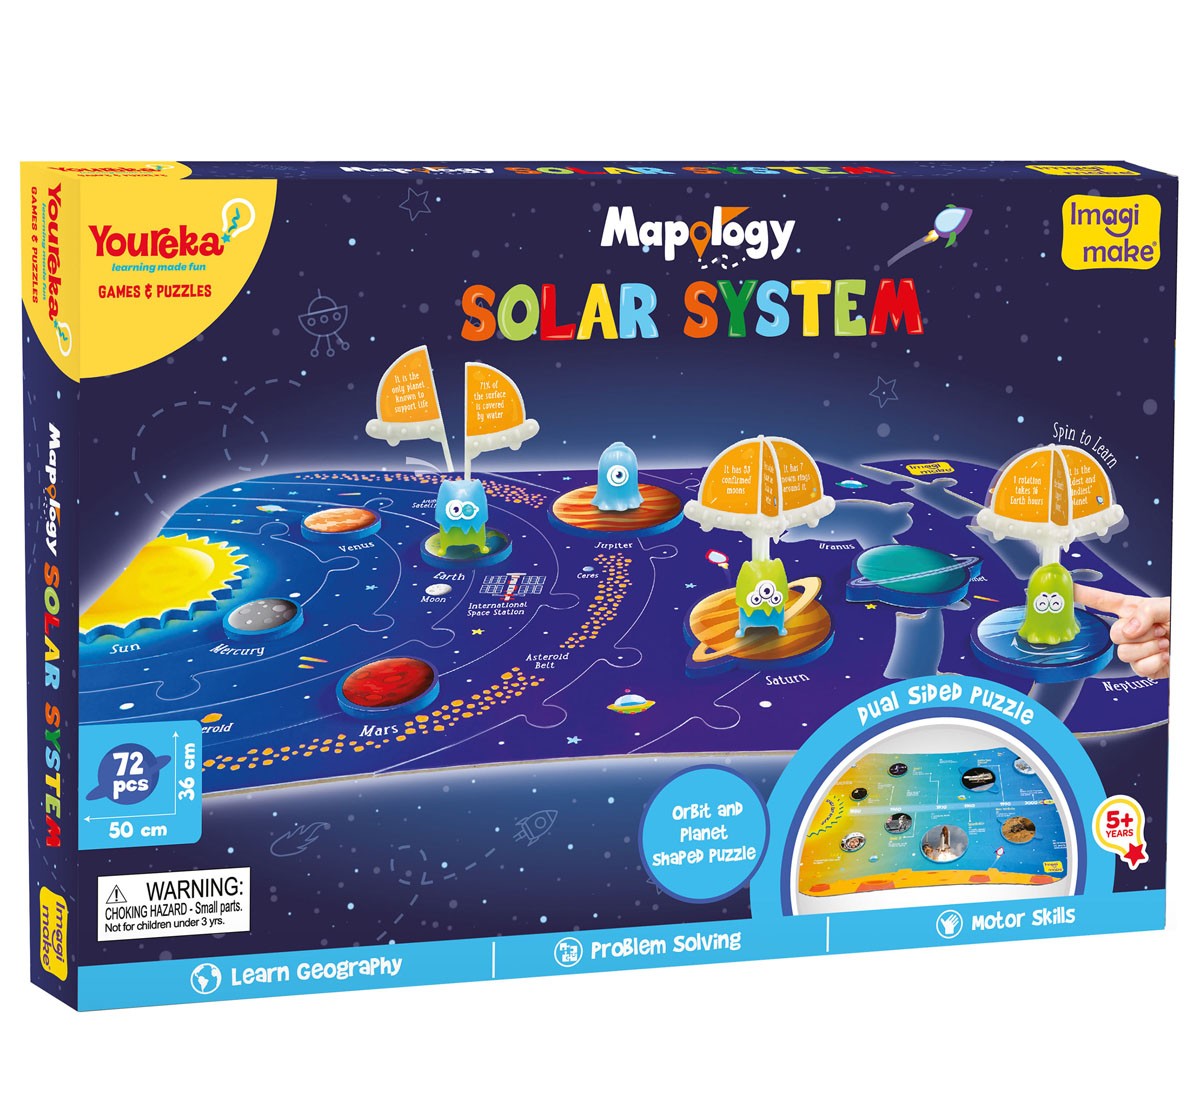 Youreka Mapology Solar System for Kids Multicolor 5Y+